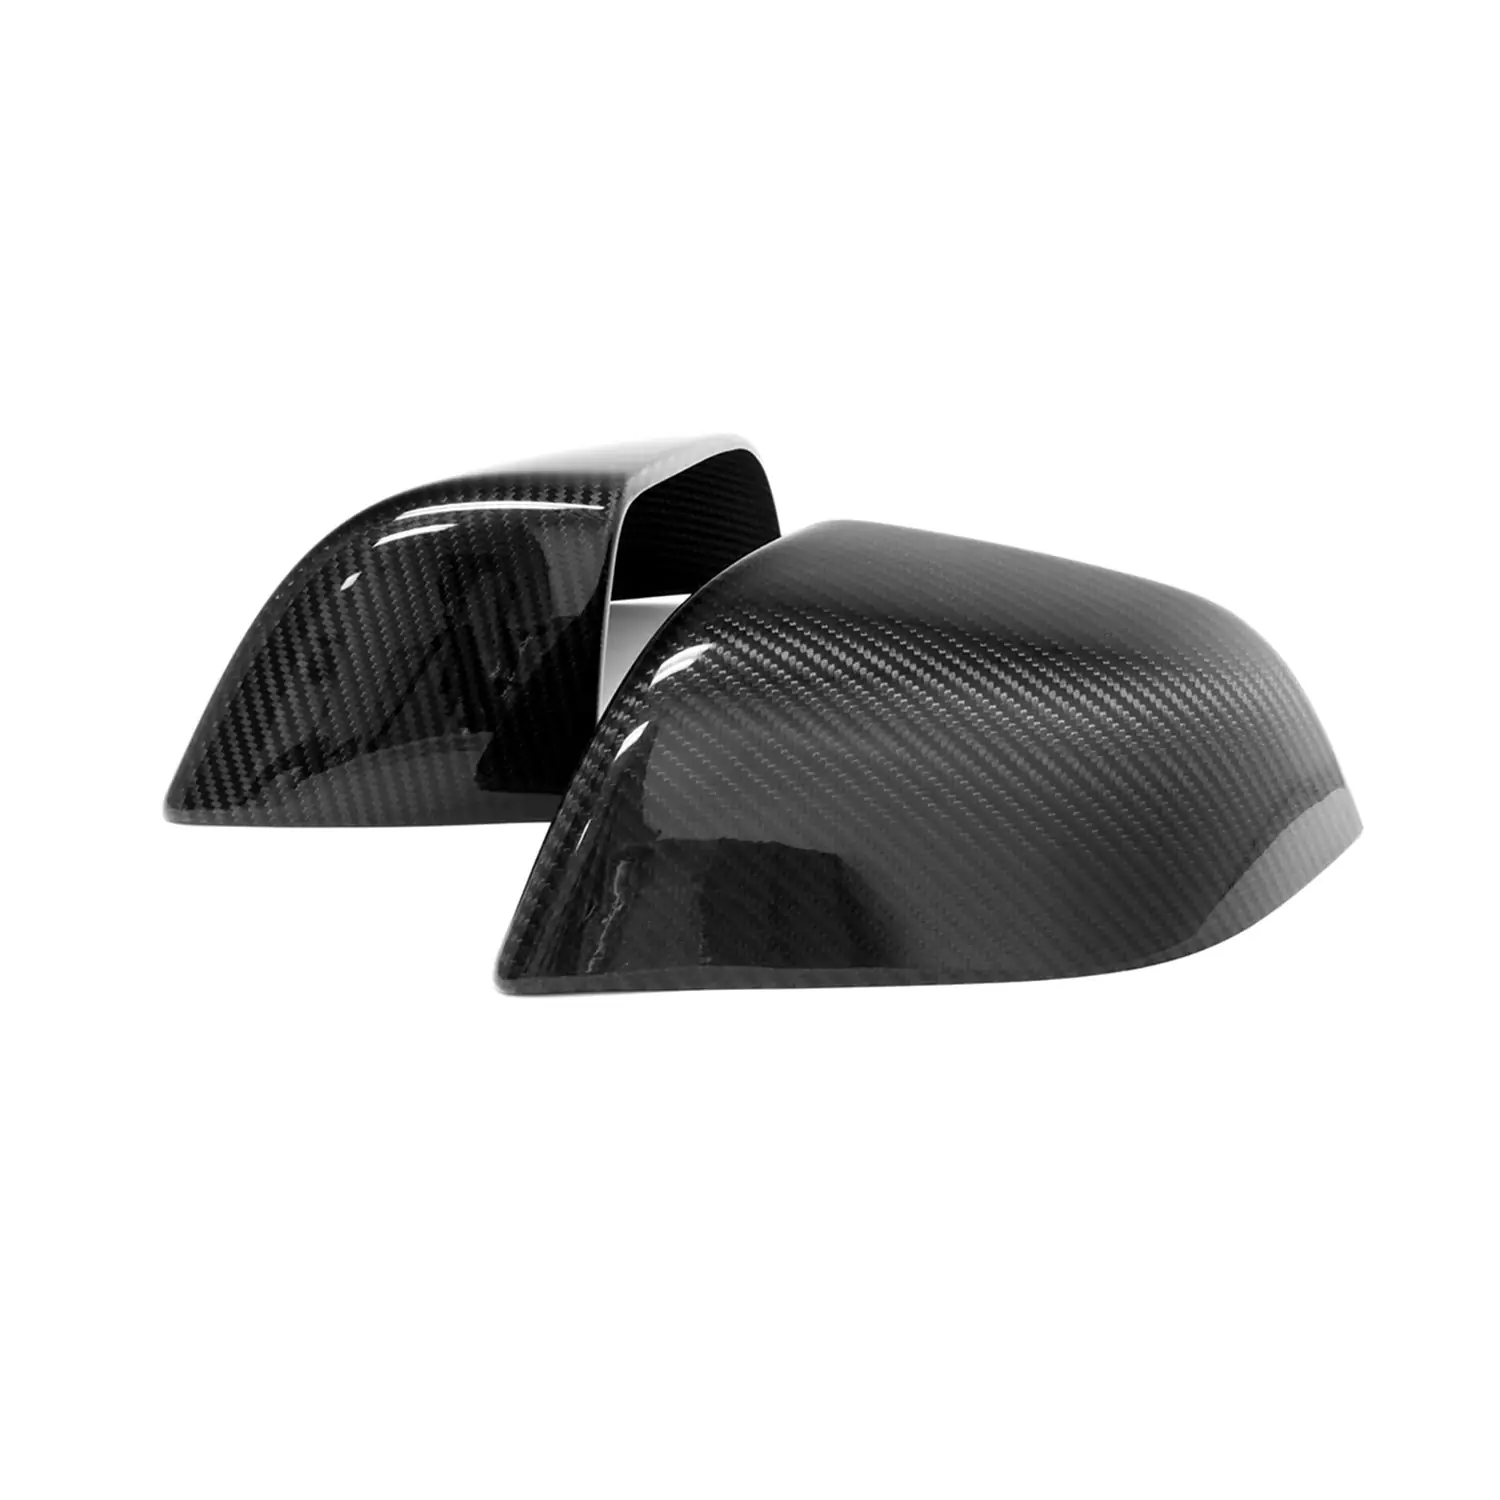 Adreama Tesla Model 3/S/X/Y Side Mirror Cover (Cap) Made With Real Premium Dry Carbon Fiber, 1 Pair (2 pcs) (Ships Within 5-7 Days)